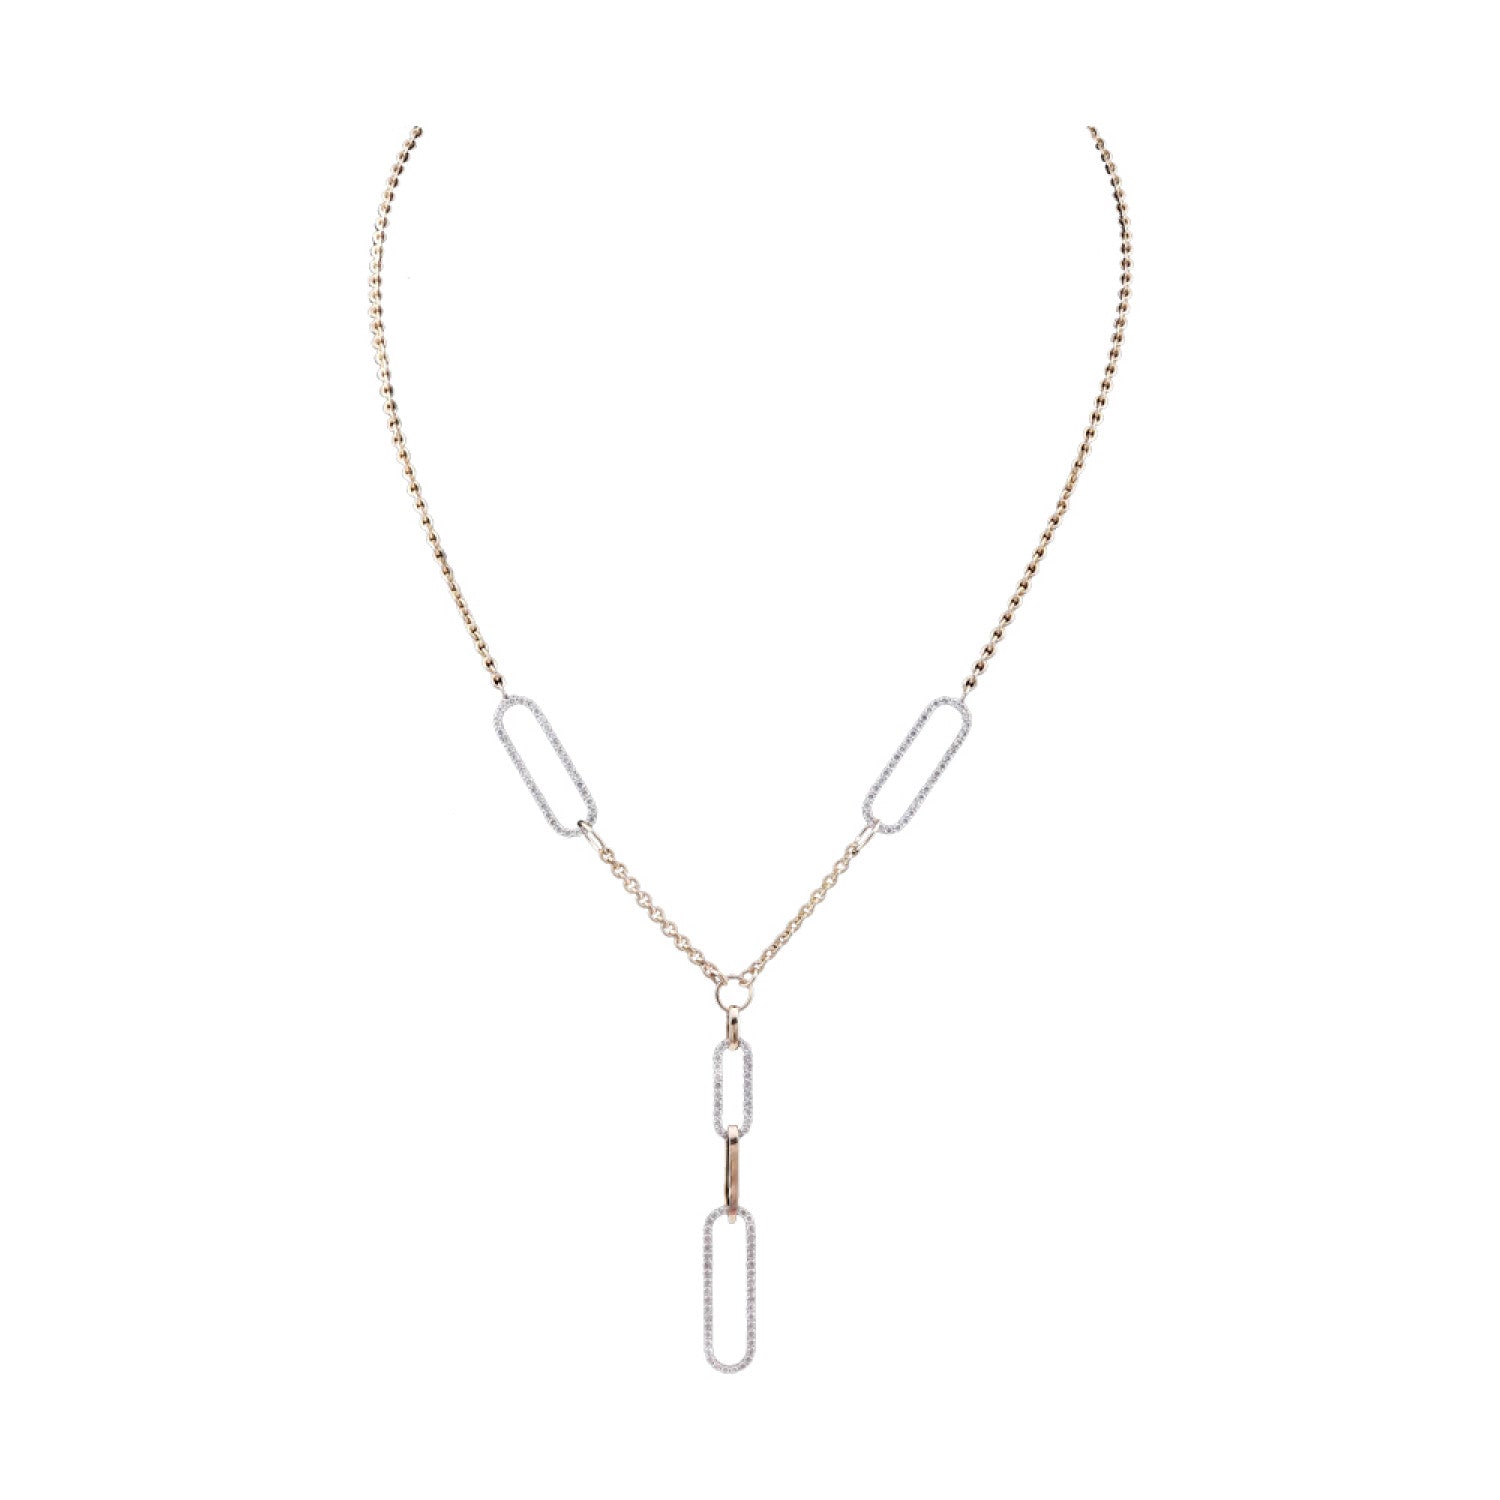 Raw Green Diamond Gold Paperclip Necklace - Bay Harbor Yacht Club